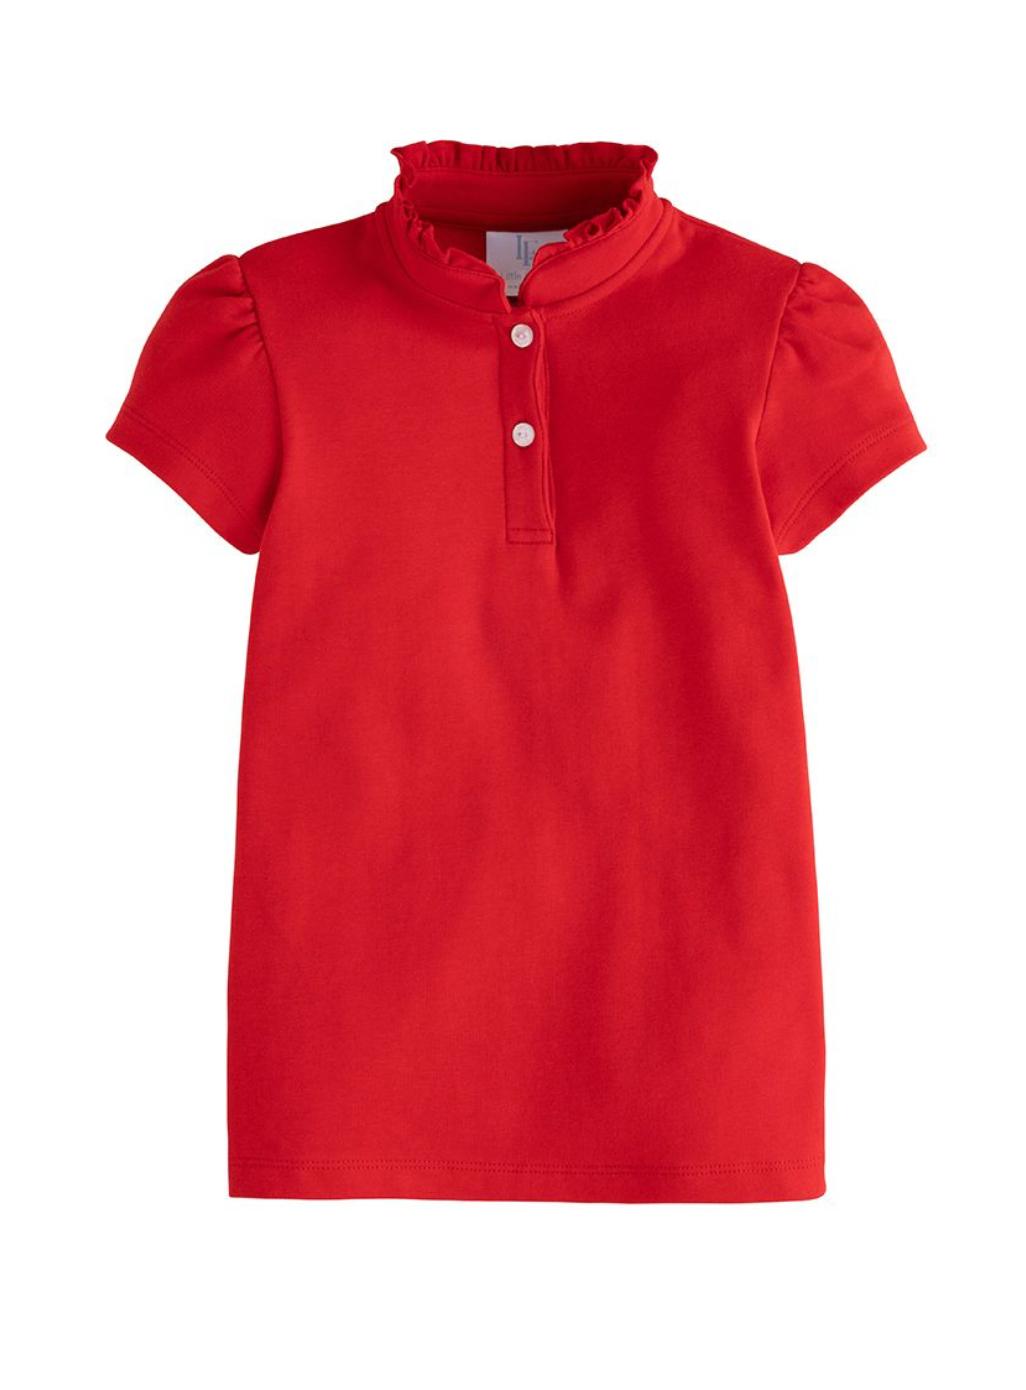 Girls Hastings Polo Red